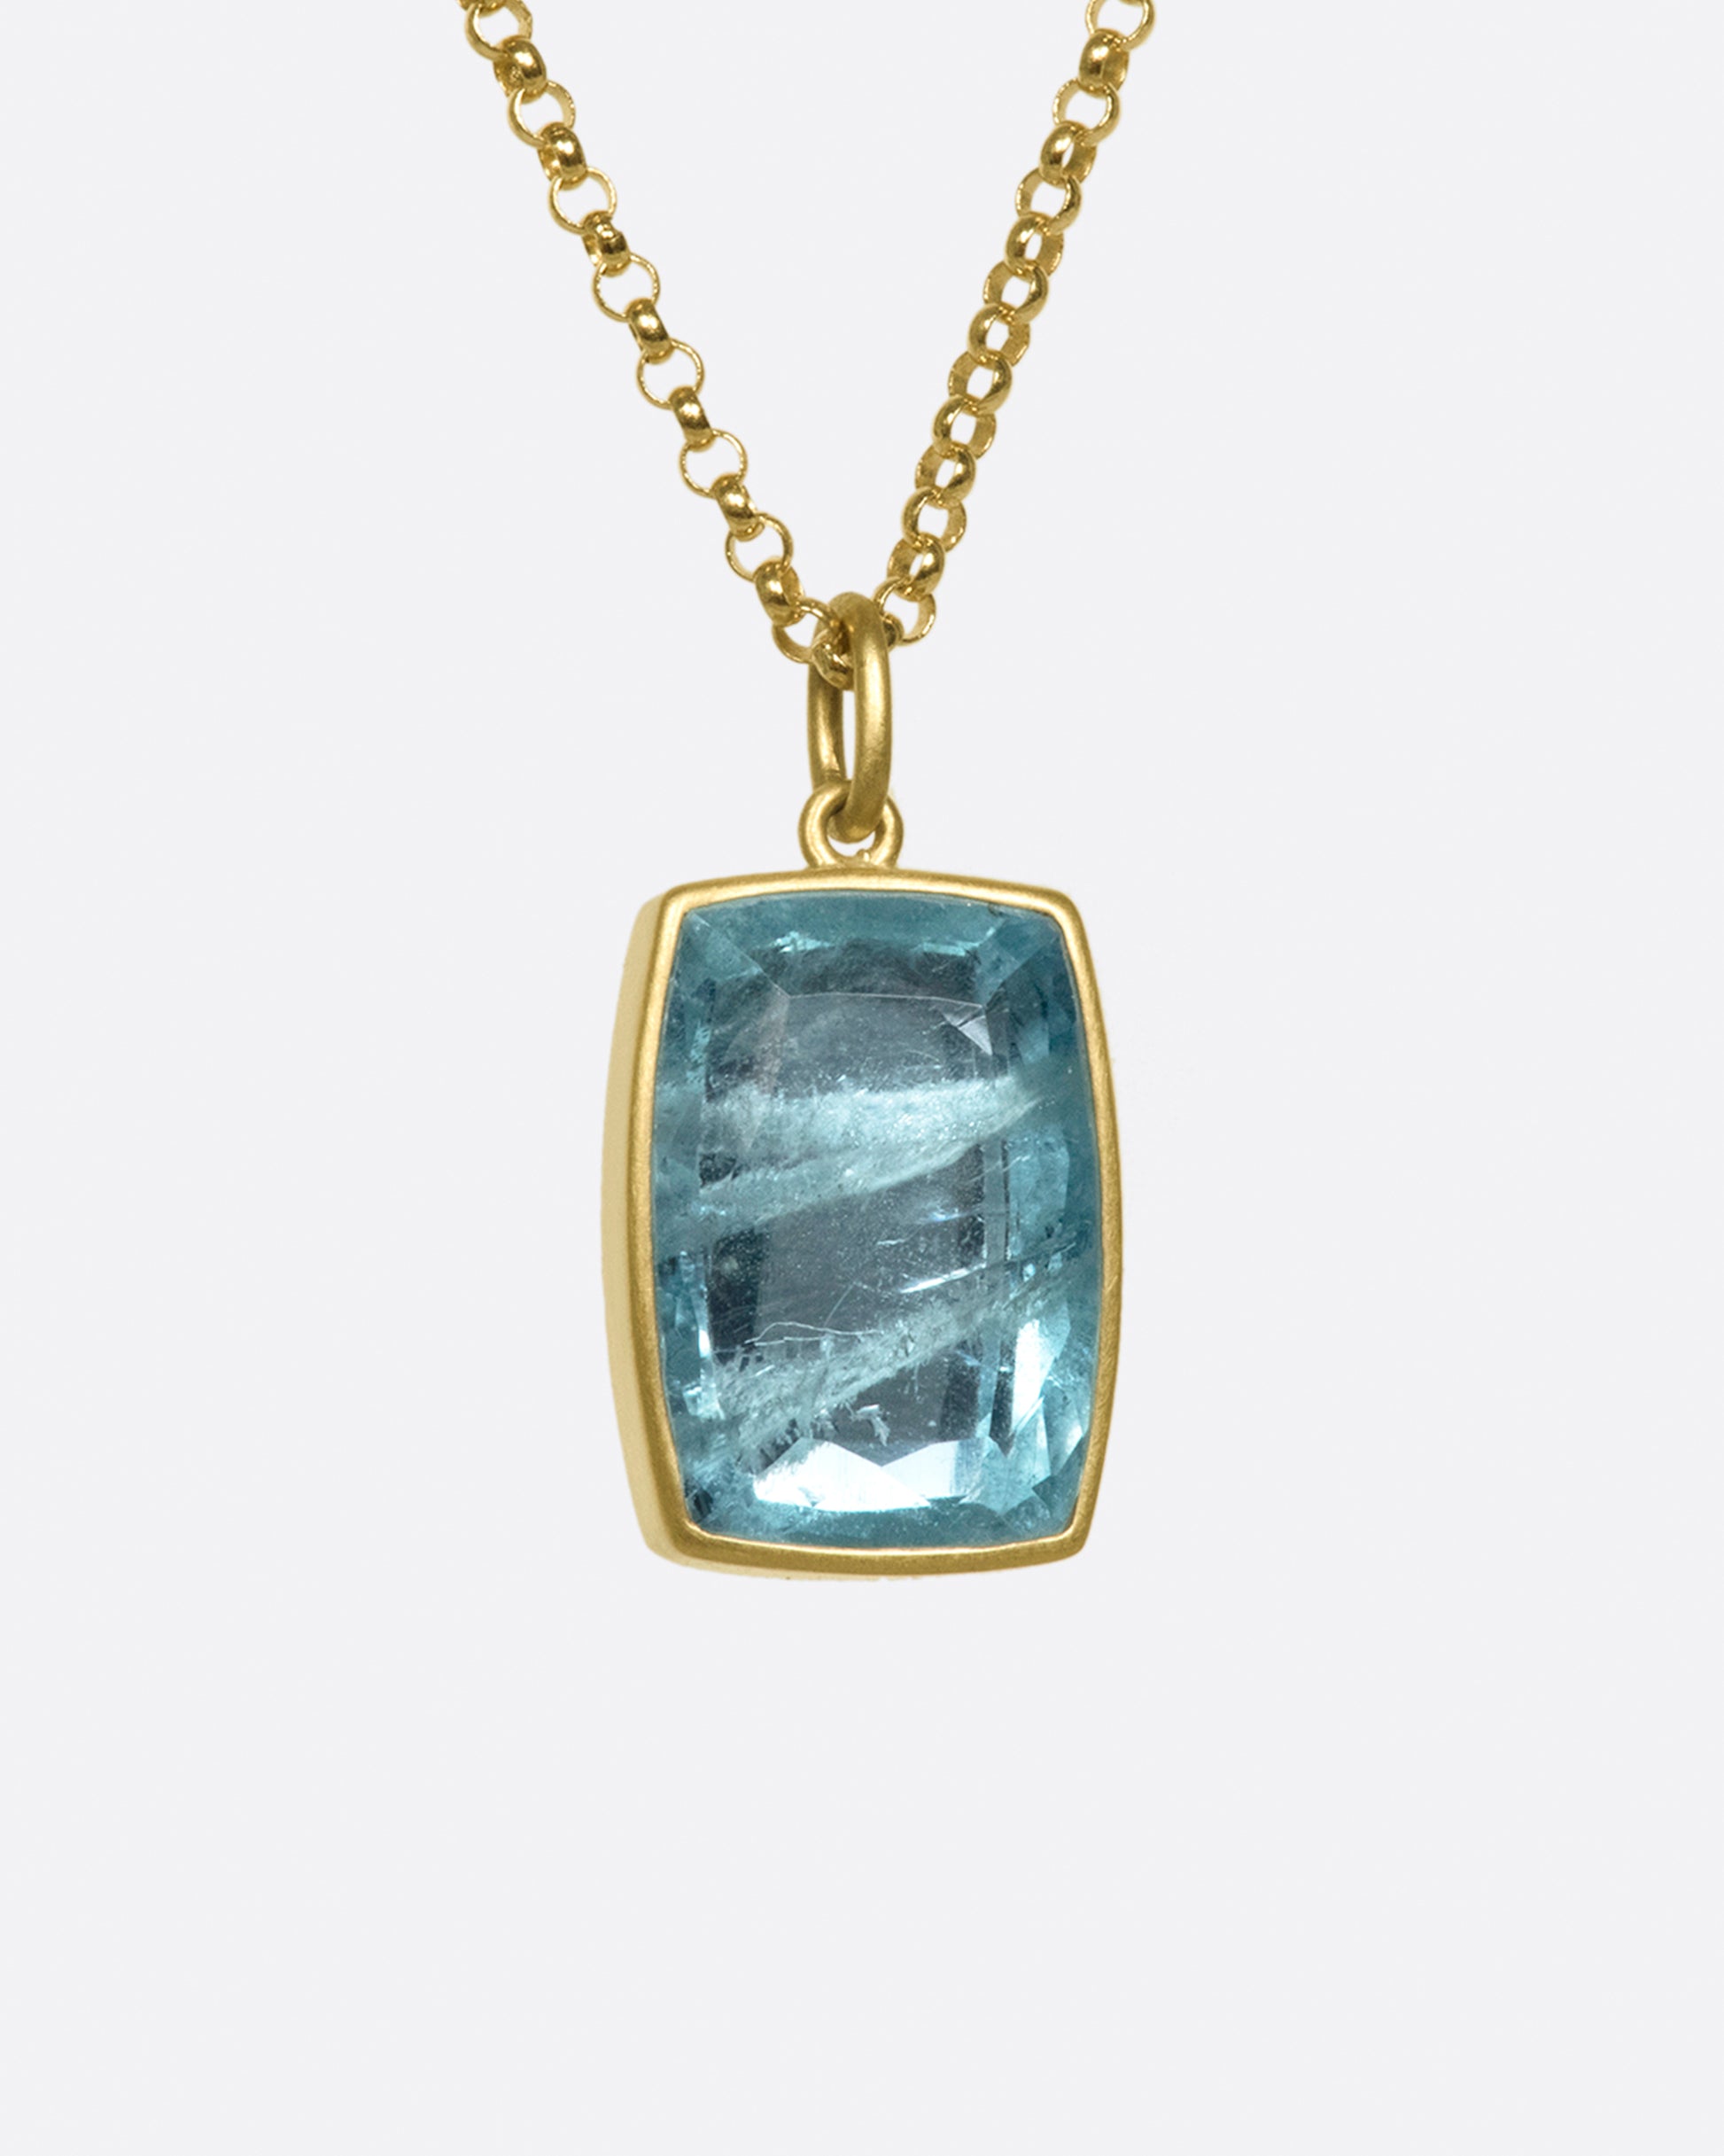 A close up side view of a cushion shaped aquamarine pendant with a yellow gold bezel on a gold chain.